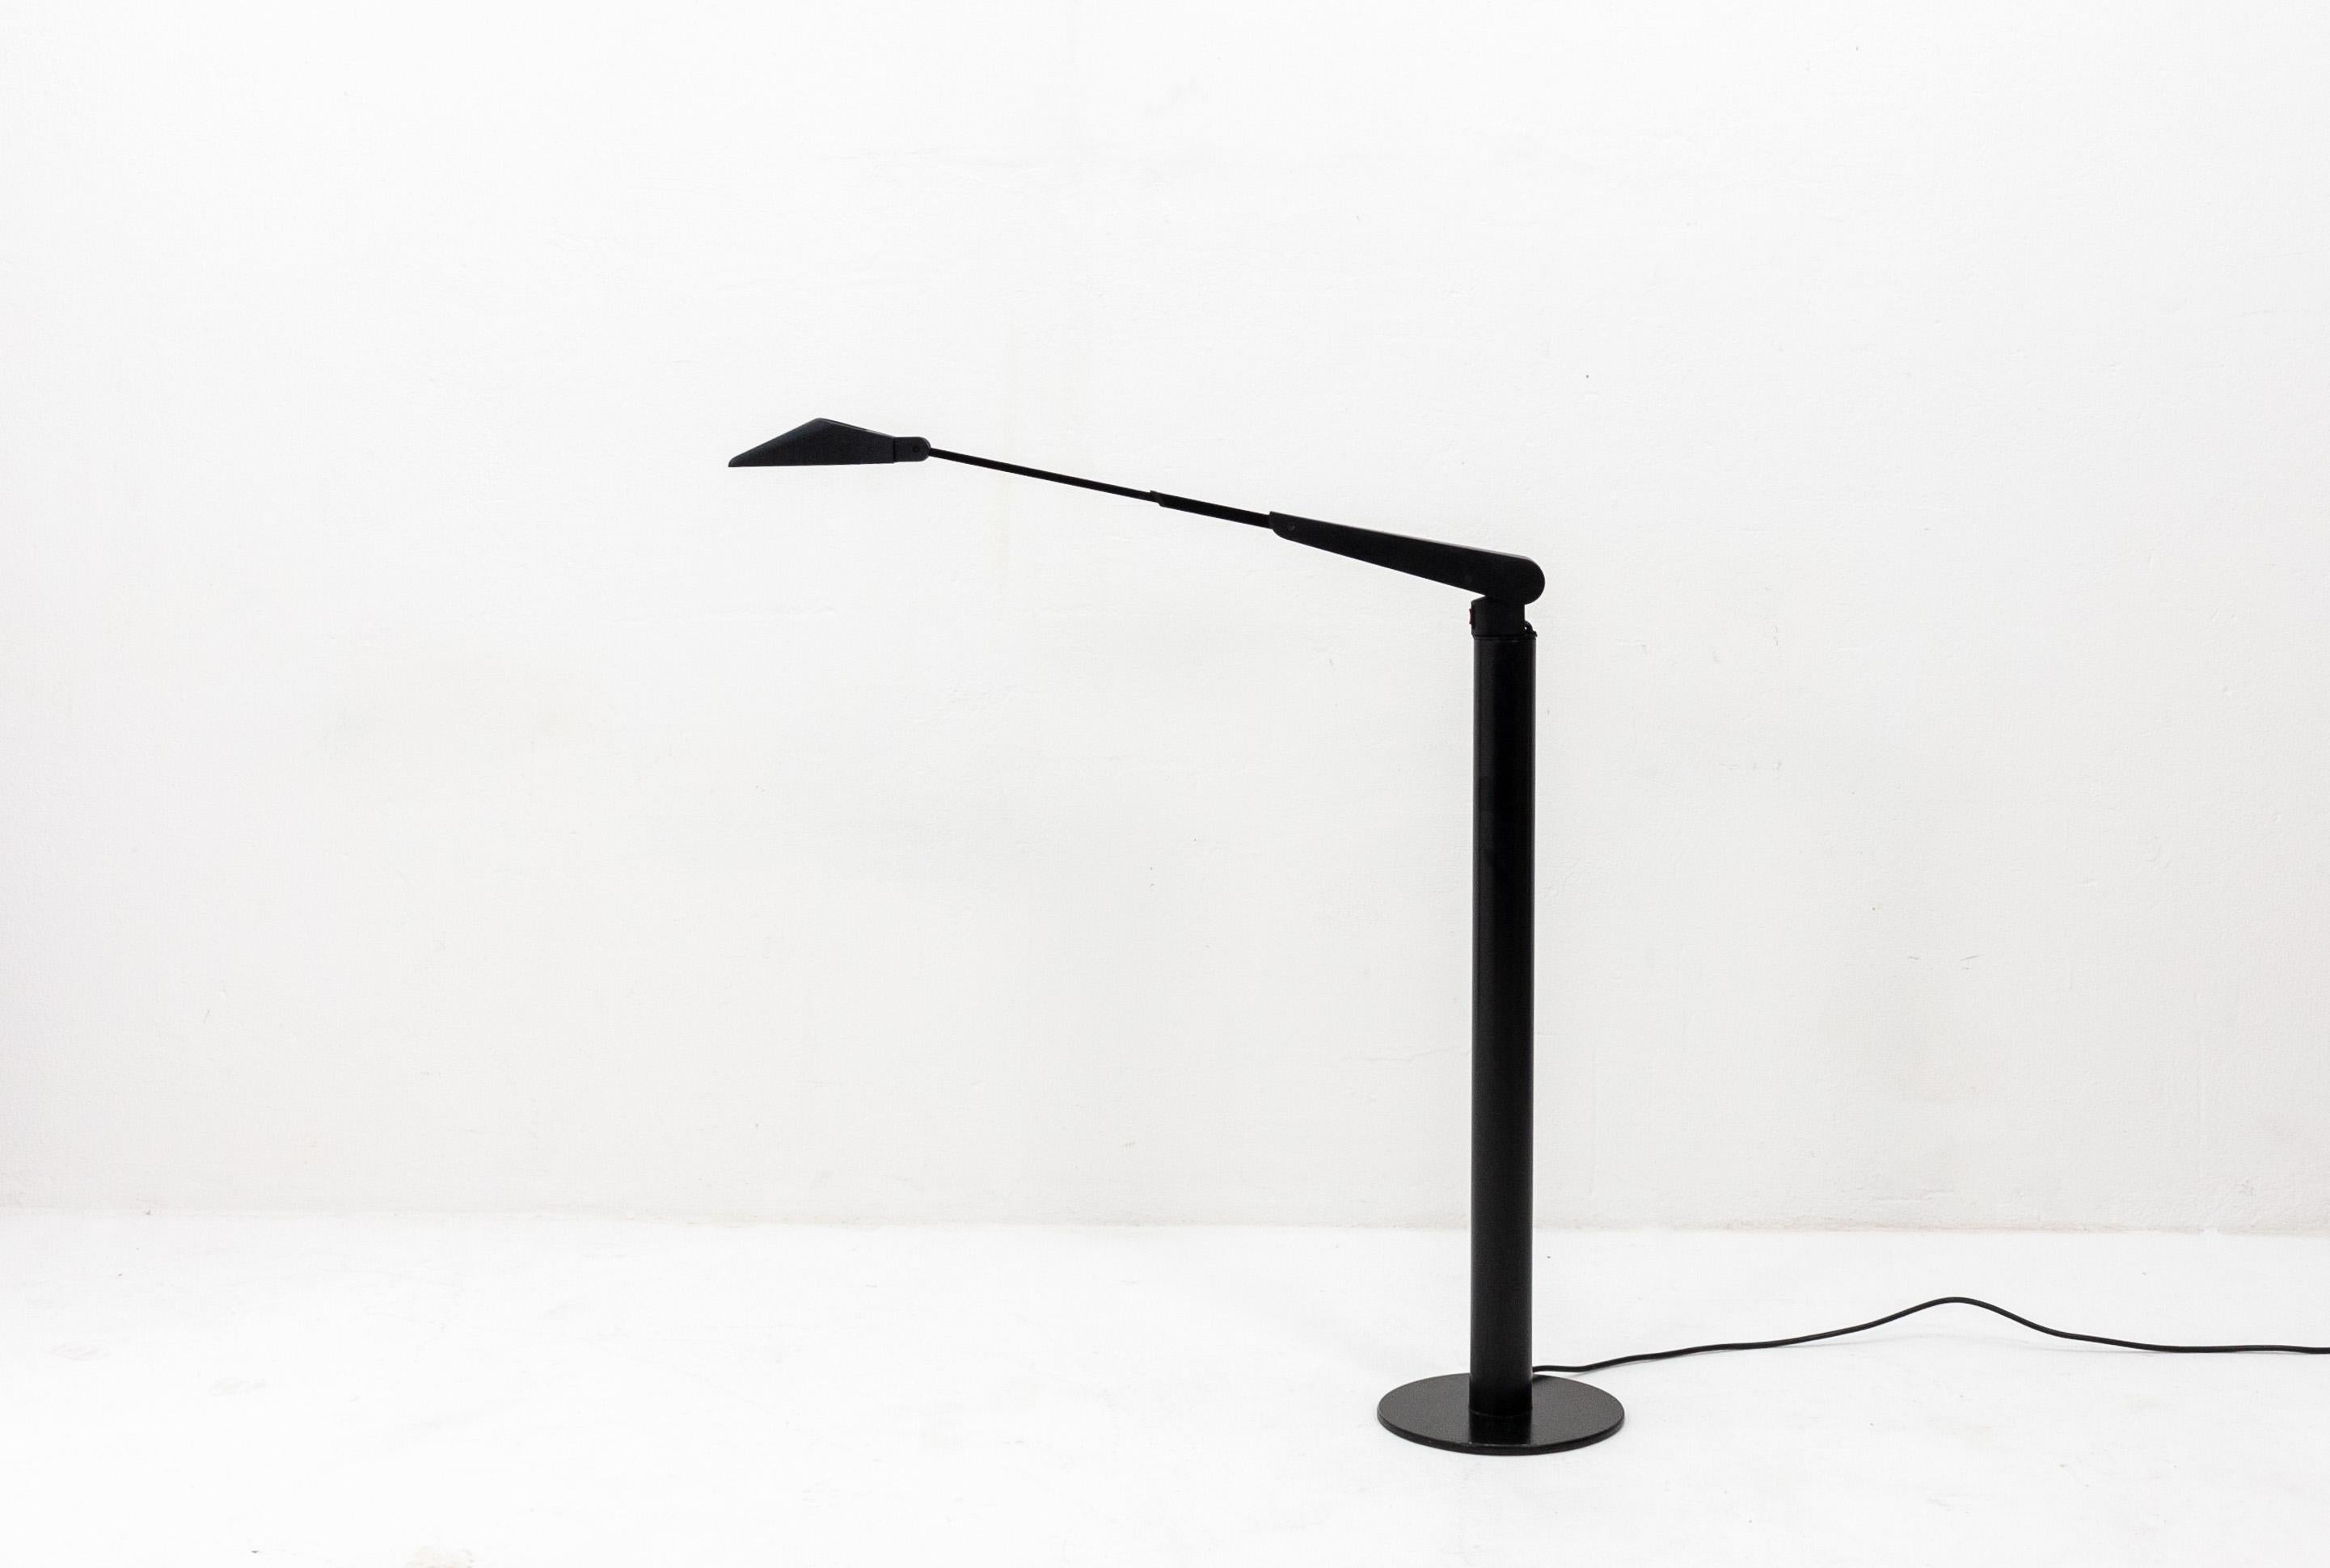 1980s floor lamp inspired by manufacturing robot arms. Featuring a two-stage dimmer and a telescoping upper arm. The light can fully rotate on its arm making it very flexible.
 